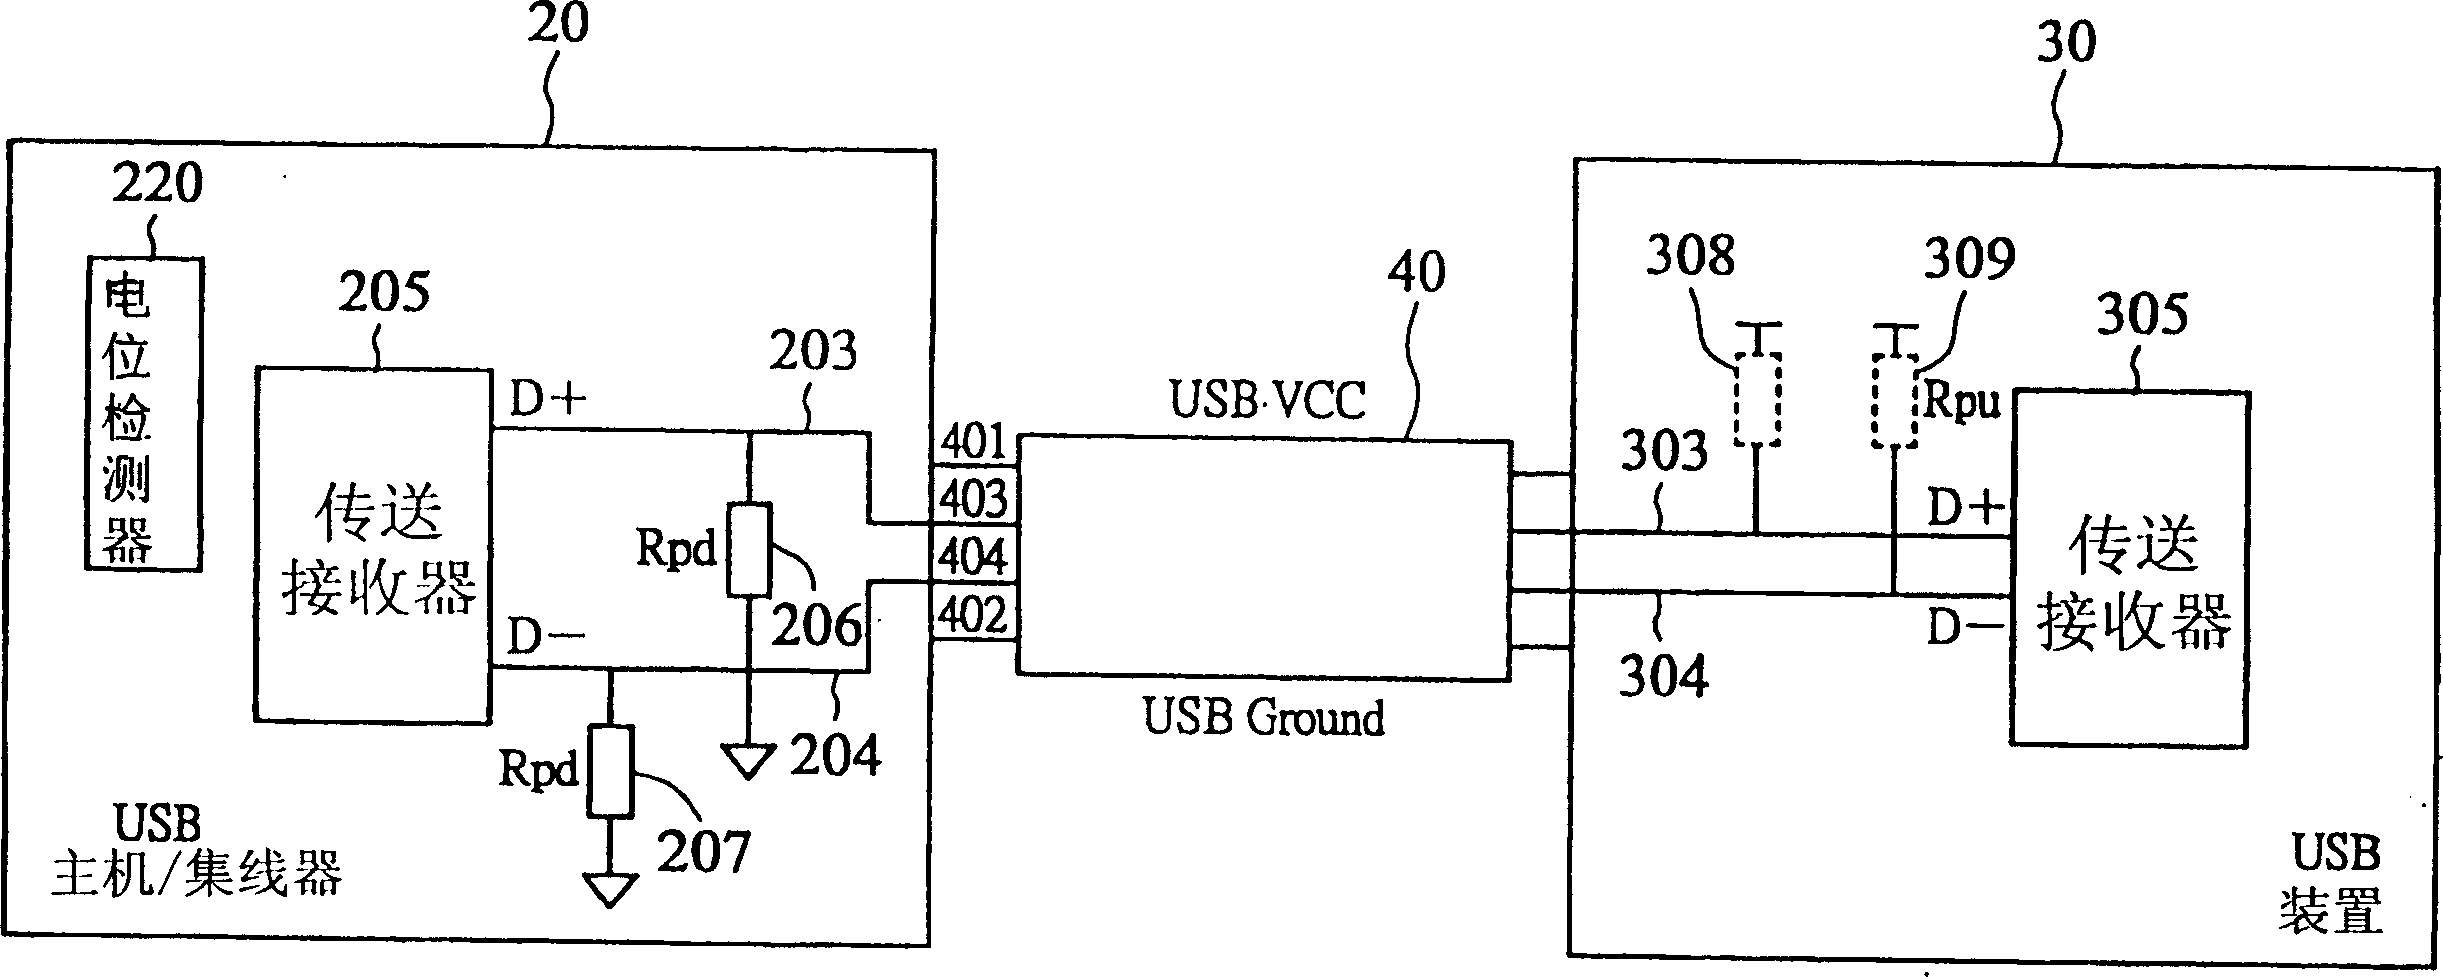 Universal serial bus (USB) connection detecting circuit system and its operation method